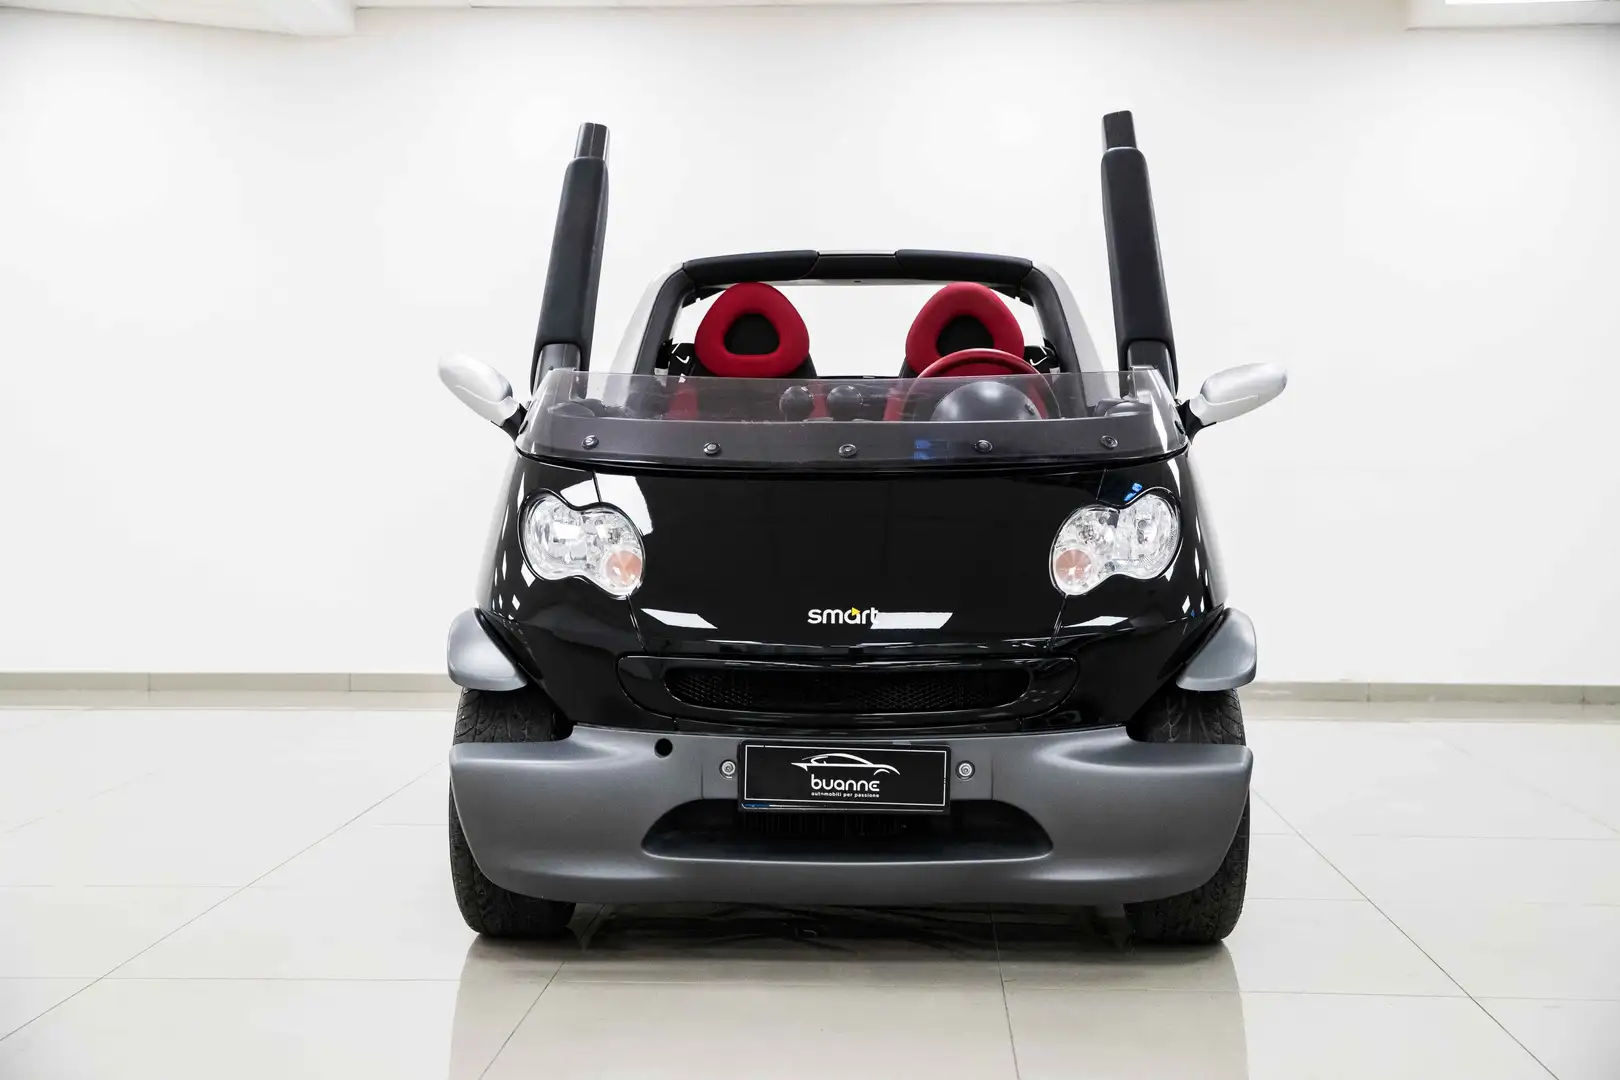 smart crossblade 0.6  Limited Edition Nº 0679 Alles. Brabus Ital crna - 2